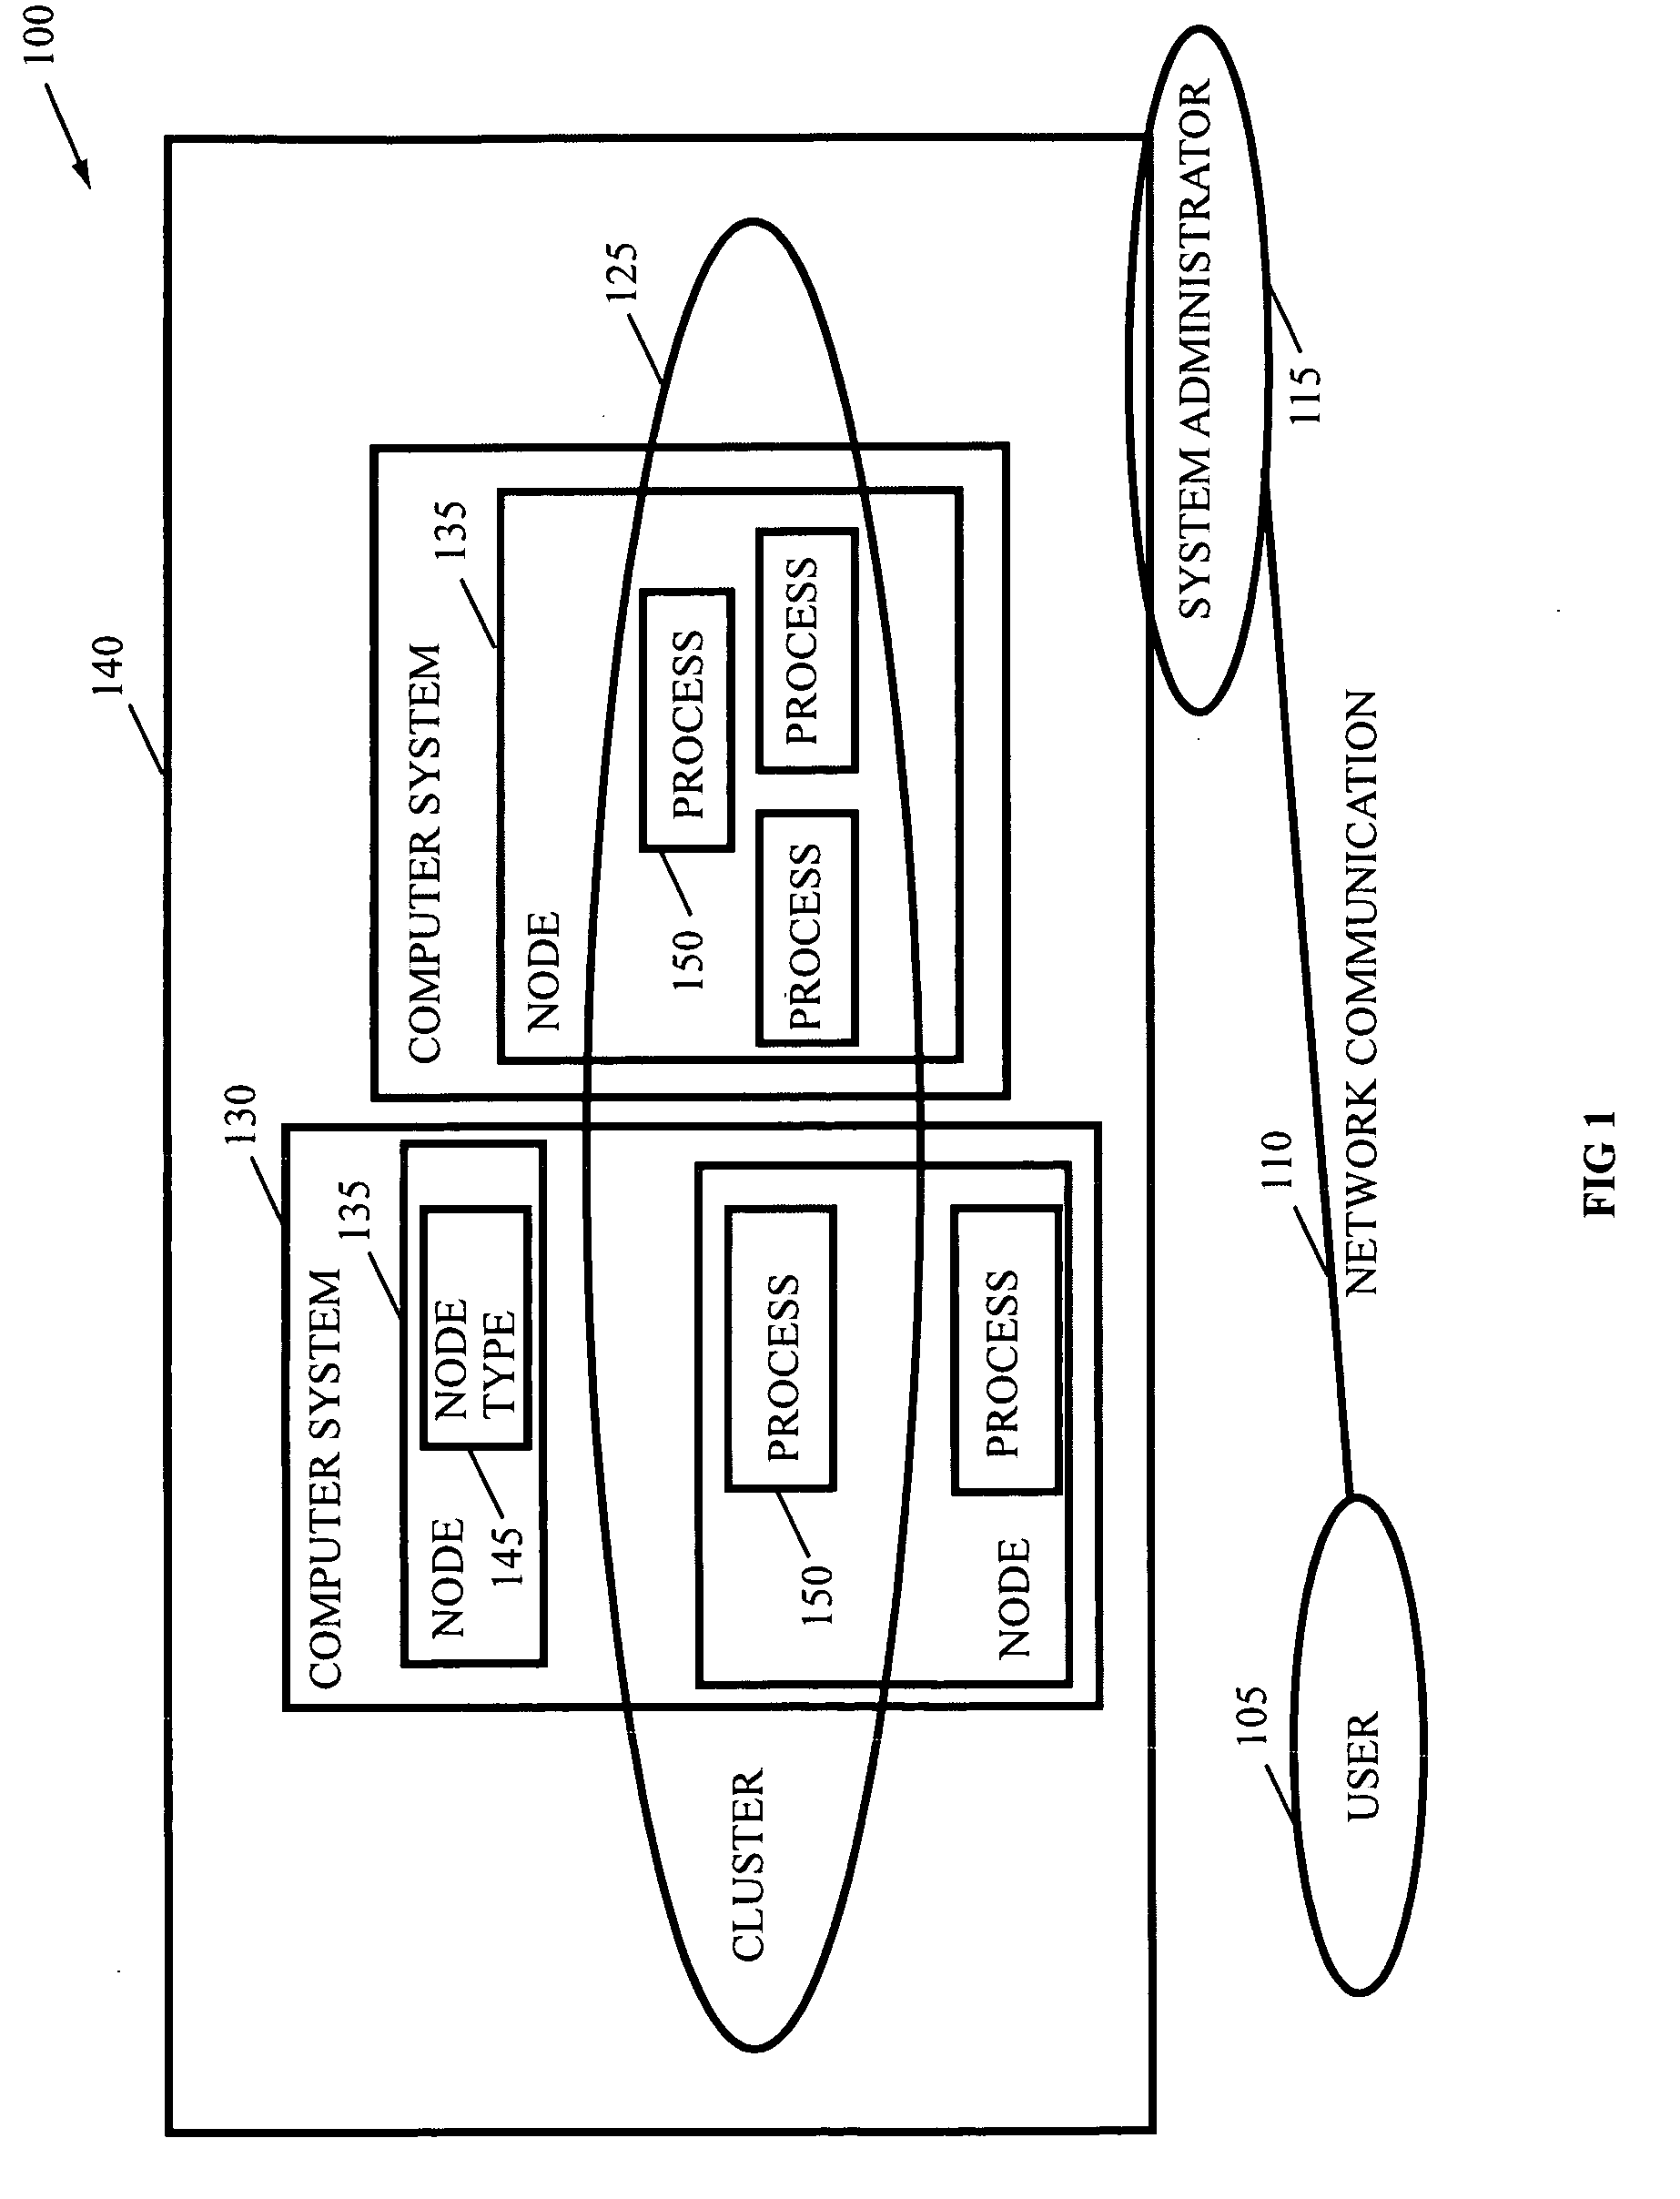 Dynamic cluster configuration in an on-demand environment